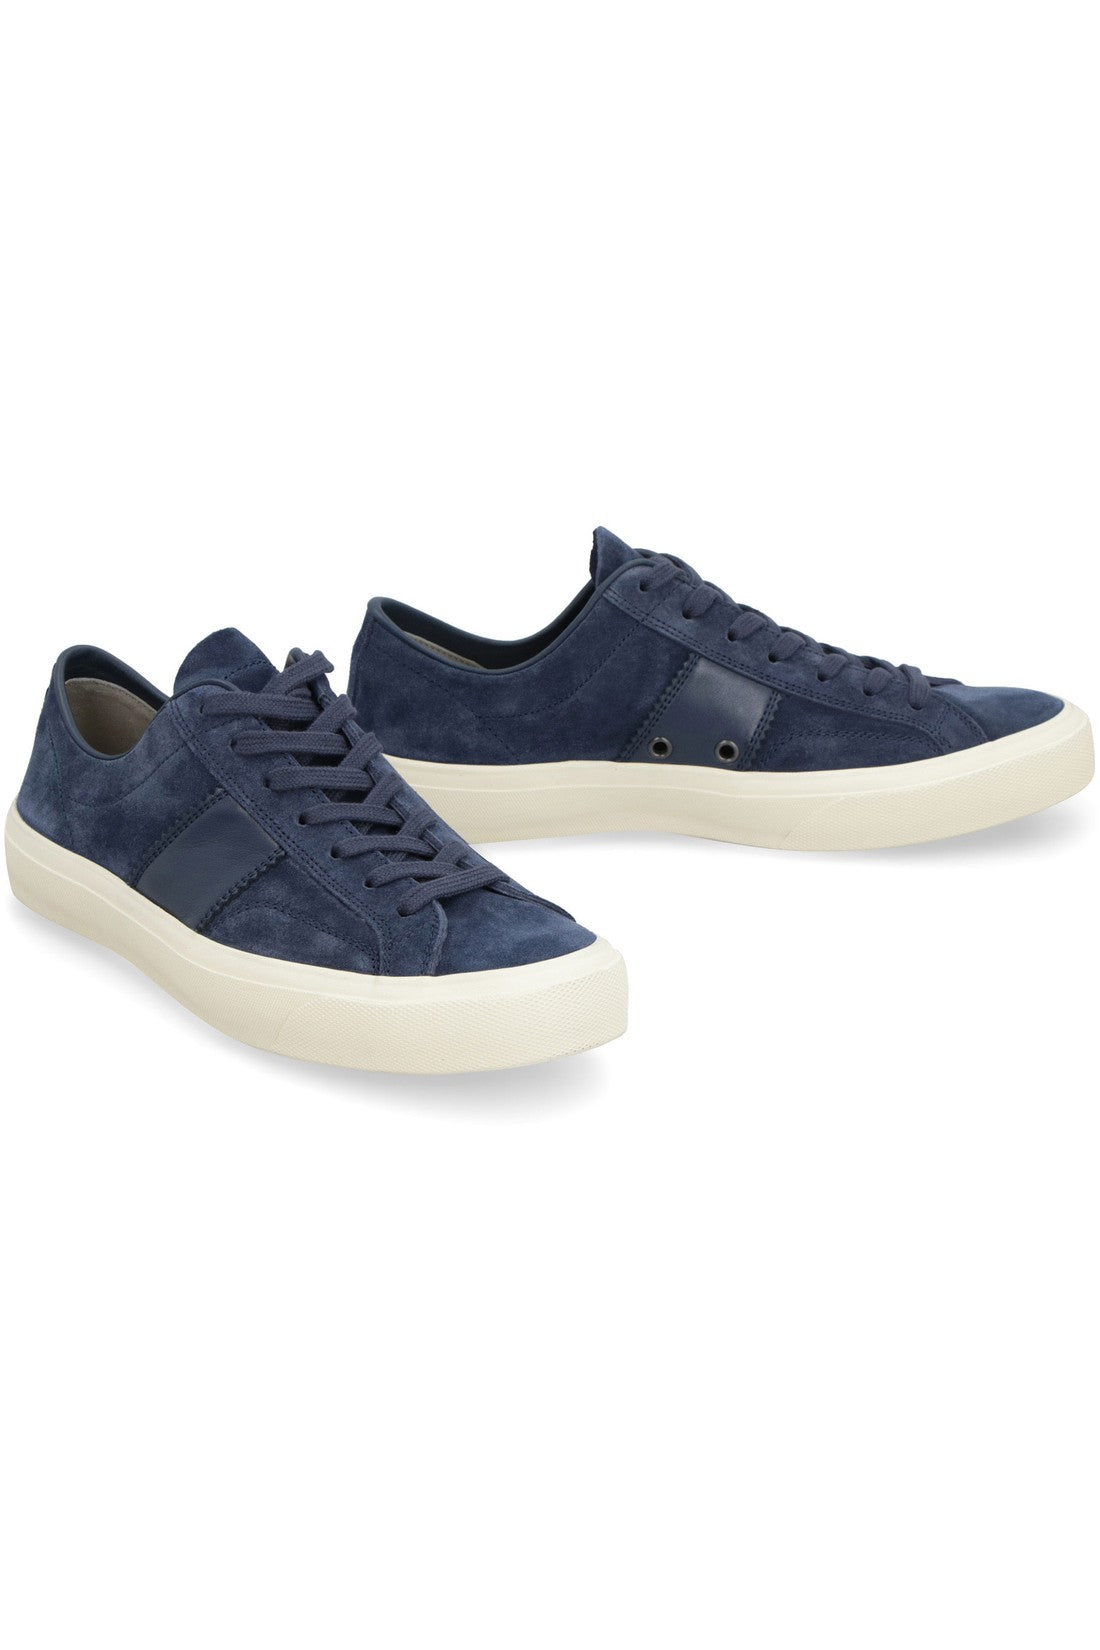 Tom Ford-OUTLET-SALE-Cambridge suede sneakers-ARCHIVIST